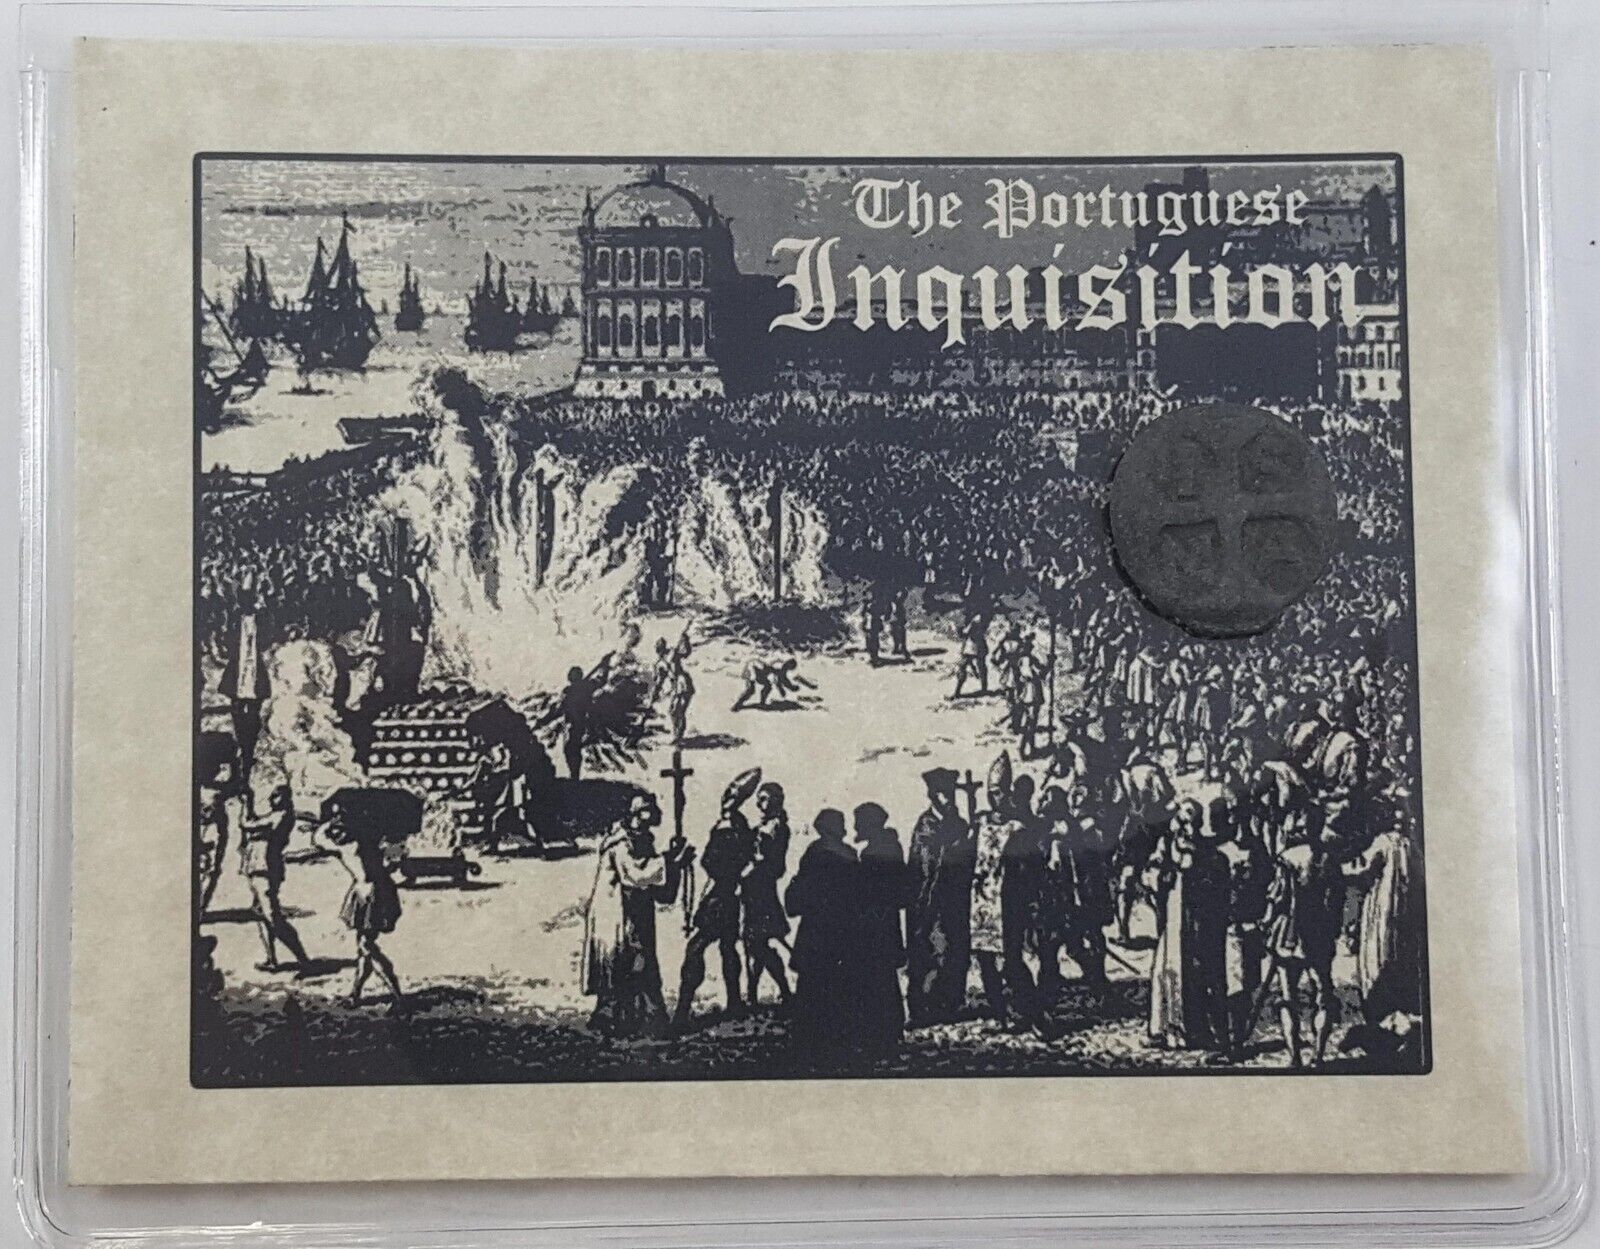 "the Portuguese Inquisition" 1500's Tin Dinheiro Coin Album. Certified Authentic